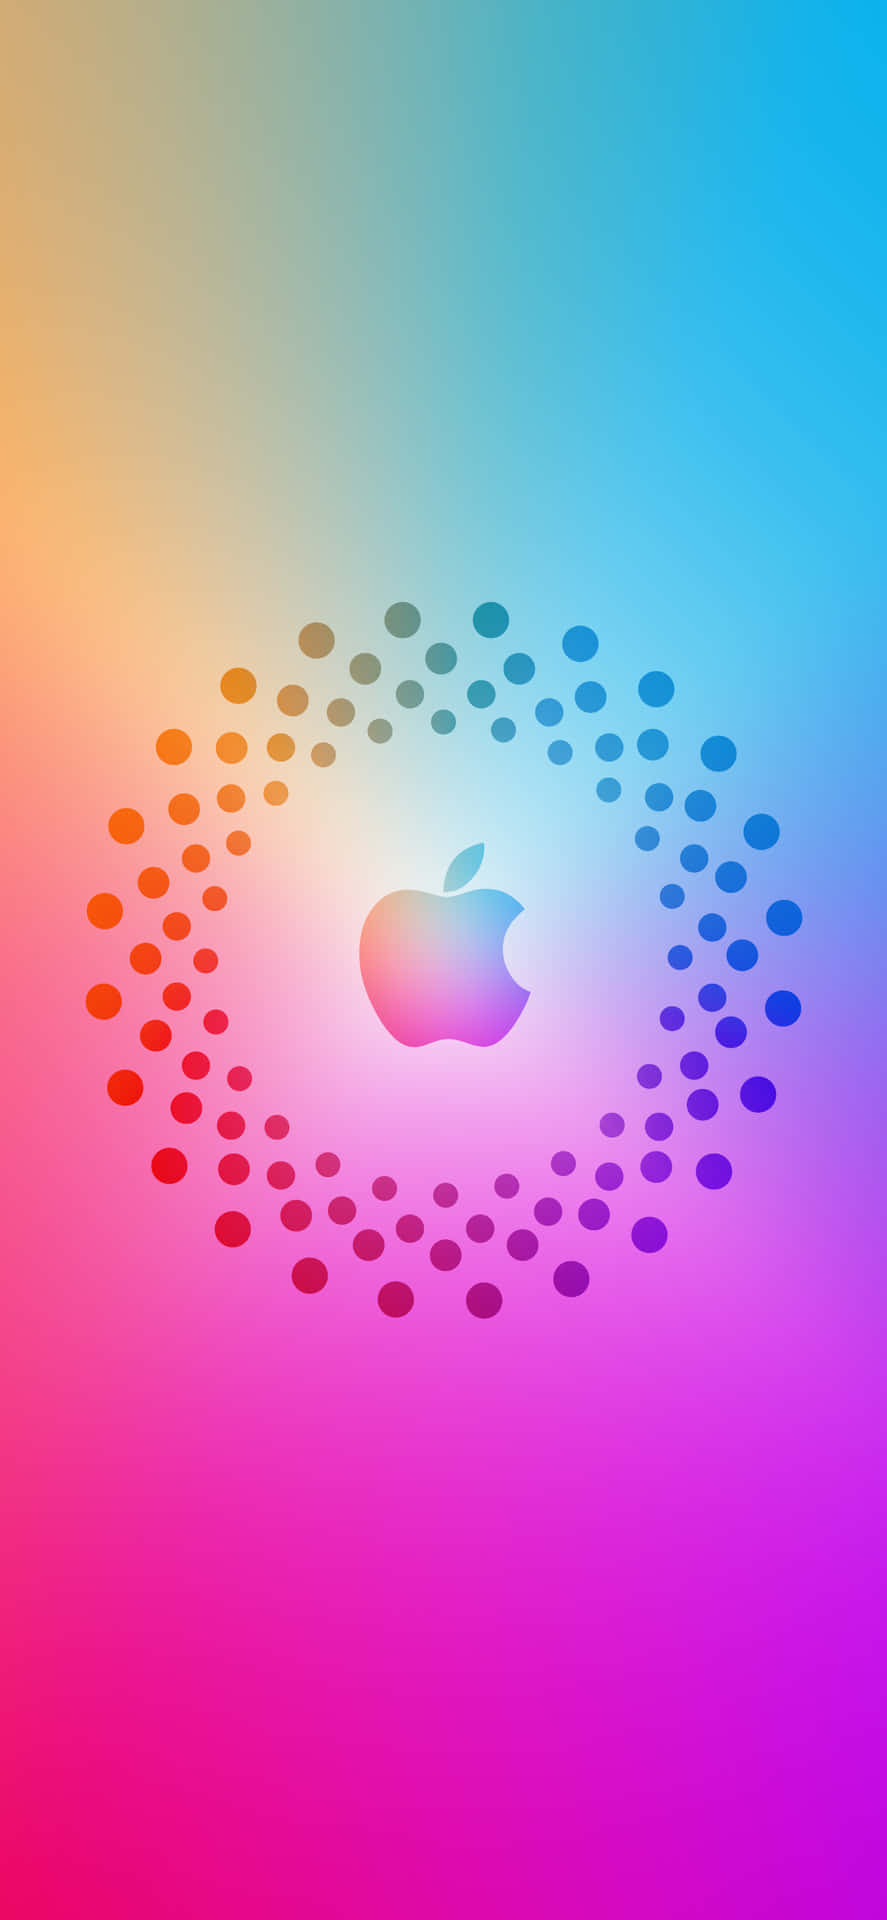 Logo With Dots Amazing Apple Hd Iphone